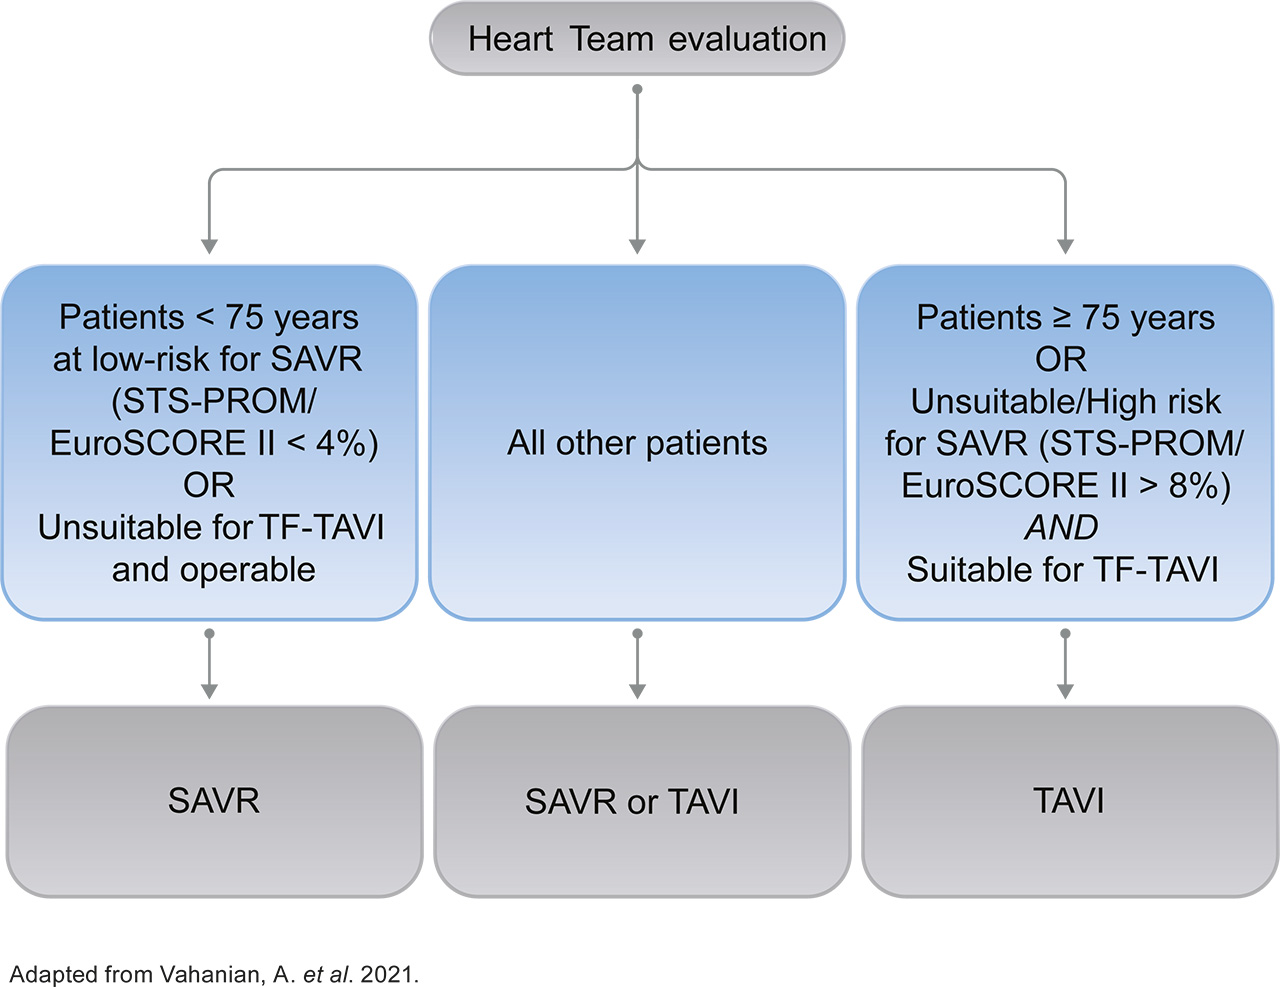 Graphic showing a new standard of care for all patients with severe aortic stenosis* ≥75 years of age: TF-TAVI